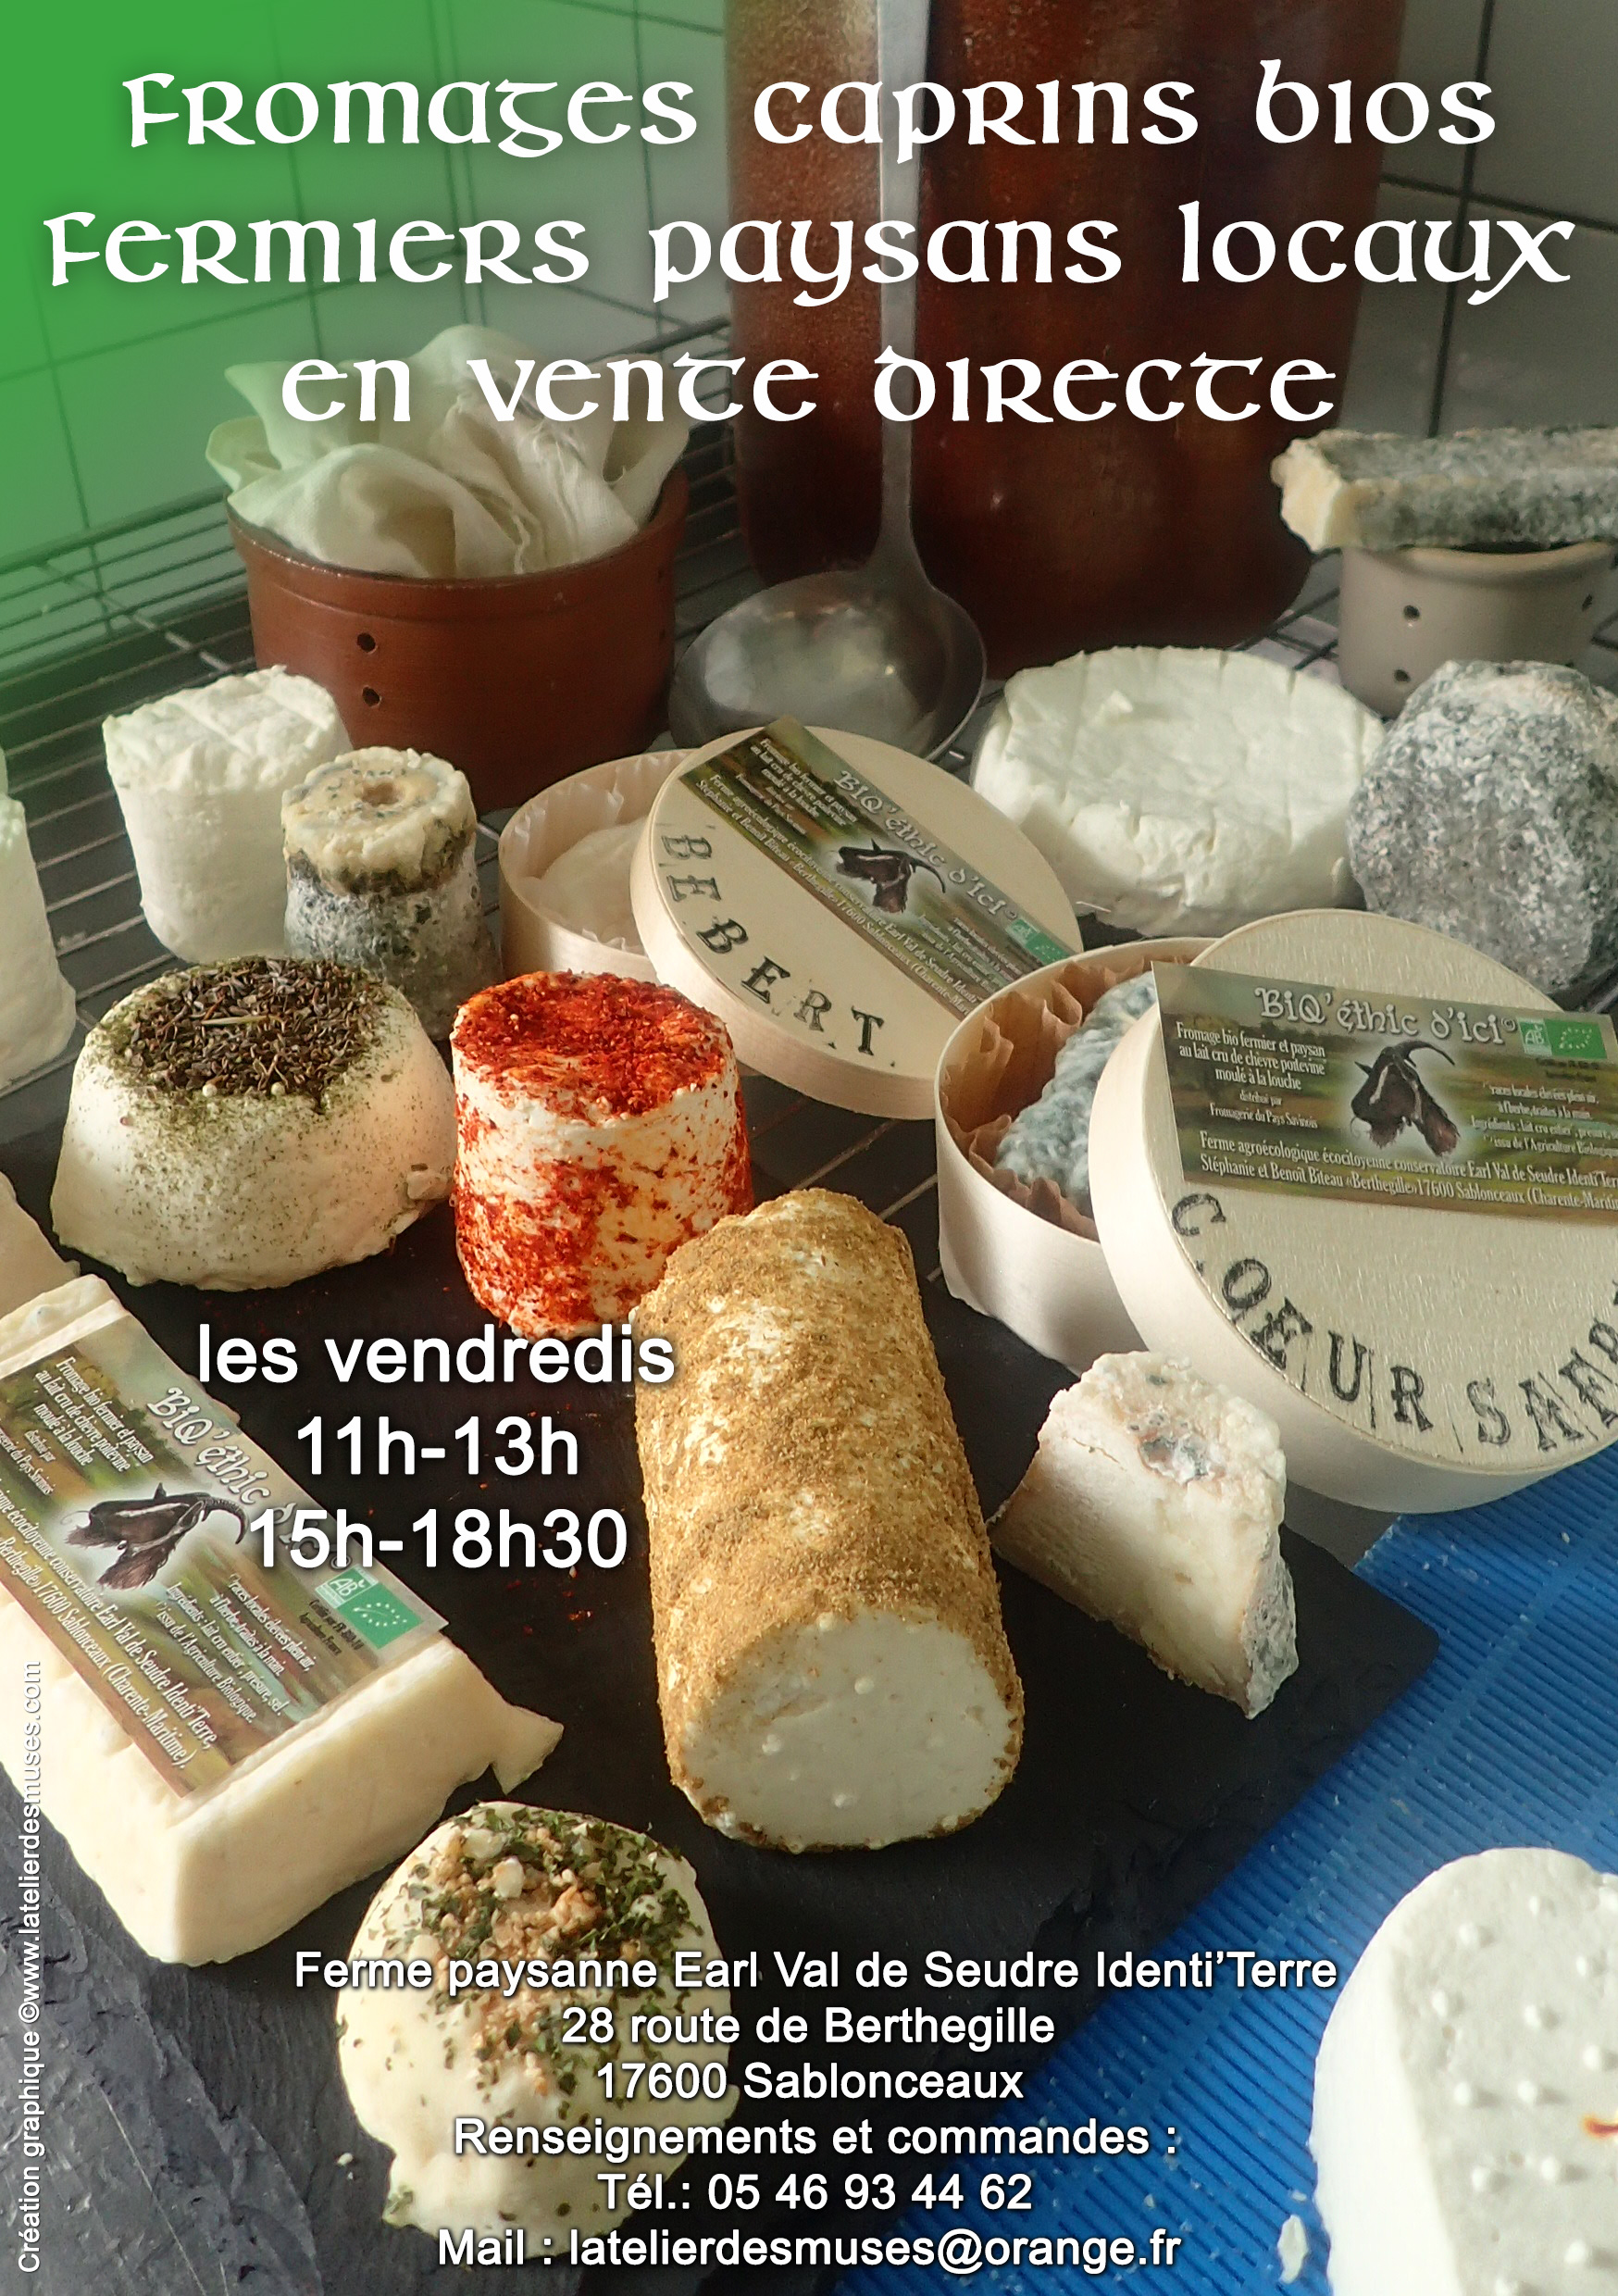 tract-ferme-vente-directe-fromages-web.jpg